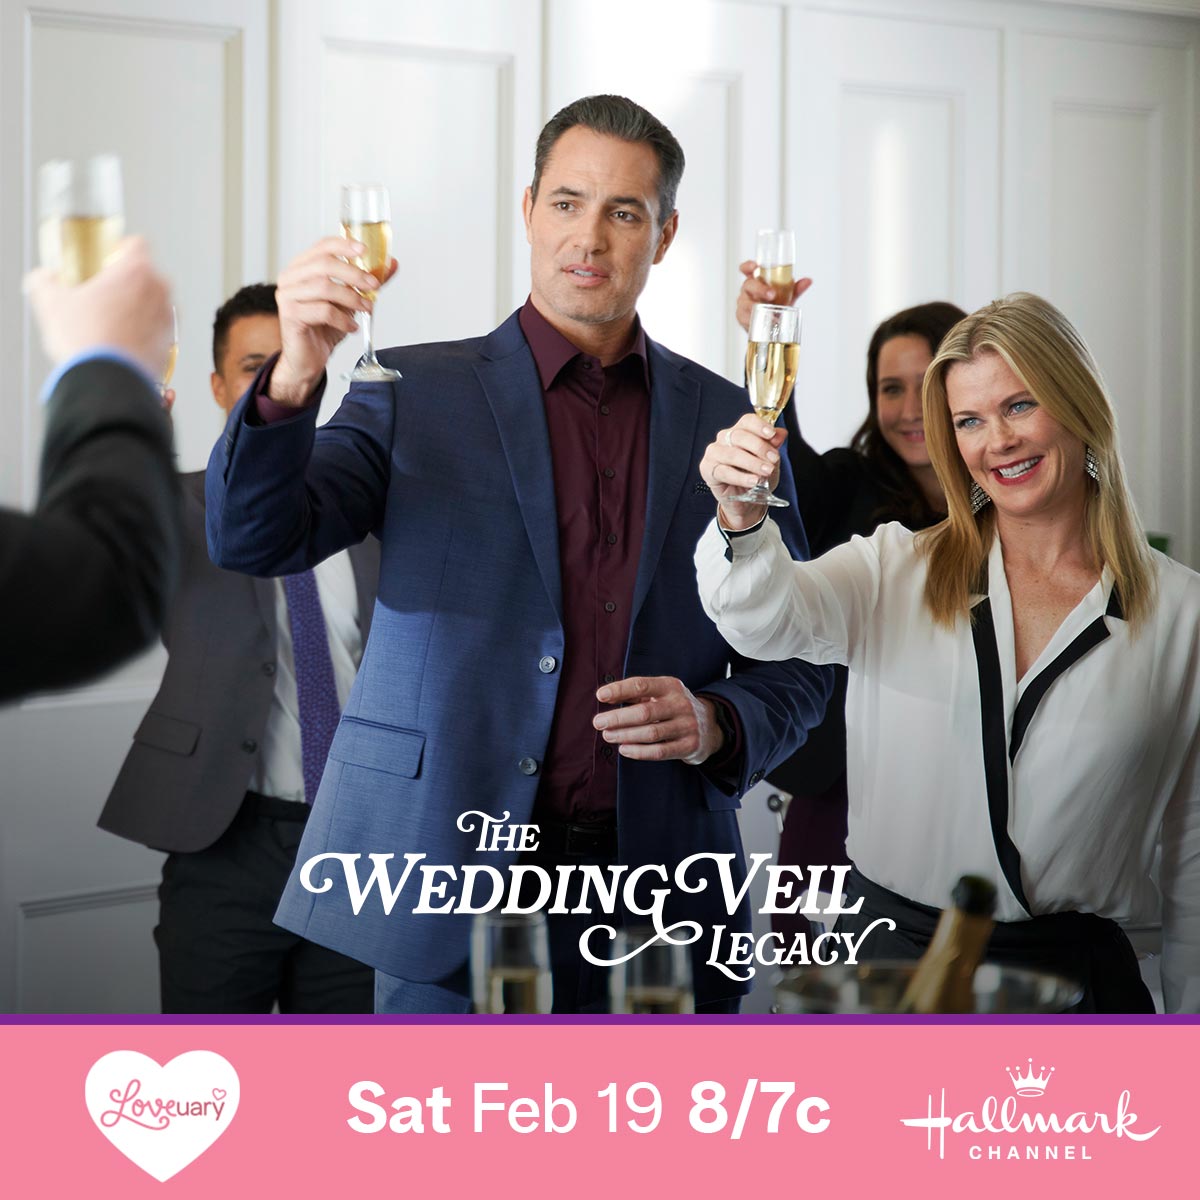 Make sure to tune in with me to "The Wedding Veil Legacy" on Saturday, February 19th at 8pm EST/7pm CST on Hallmark Channel.